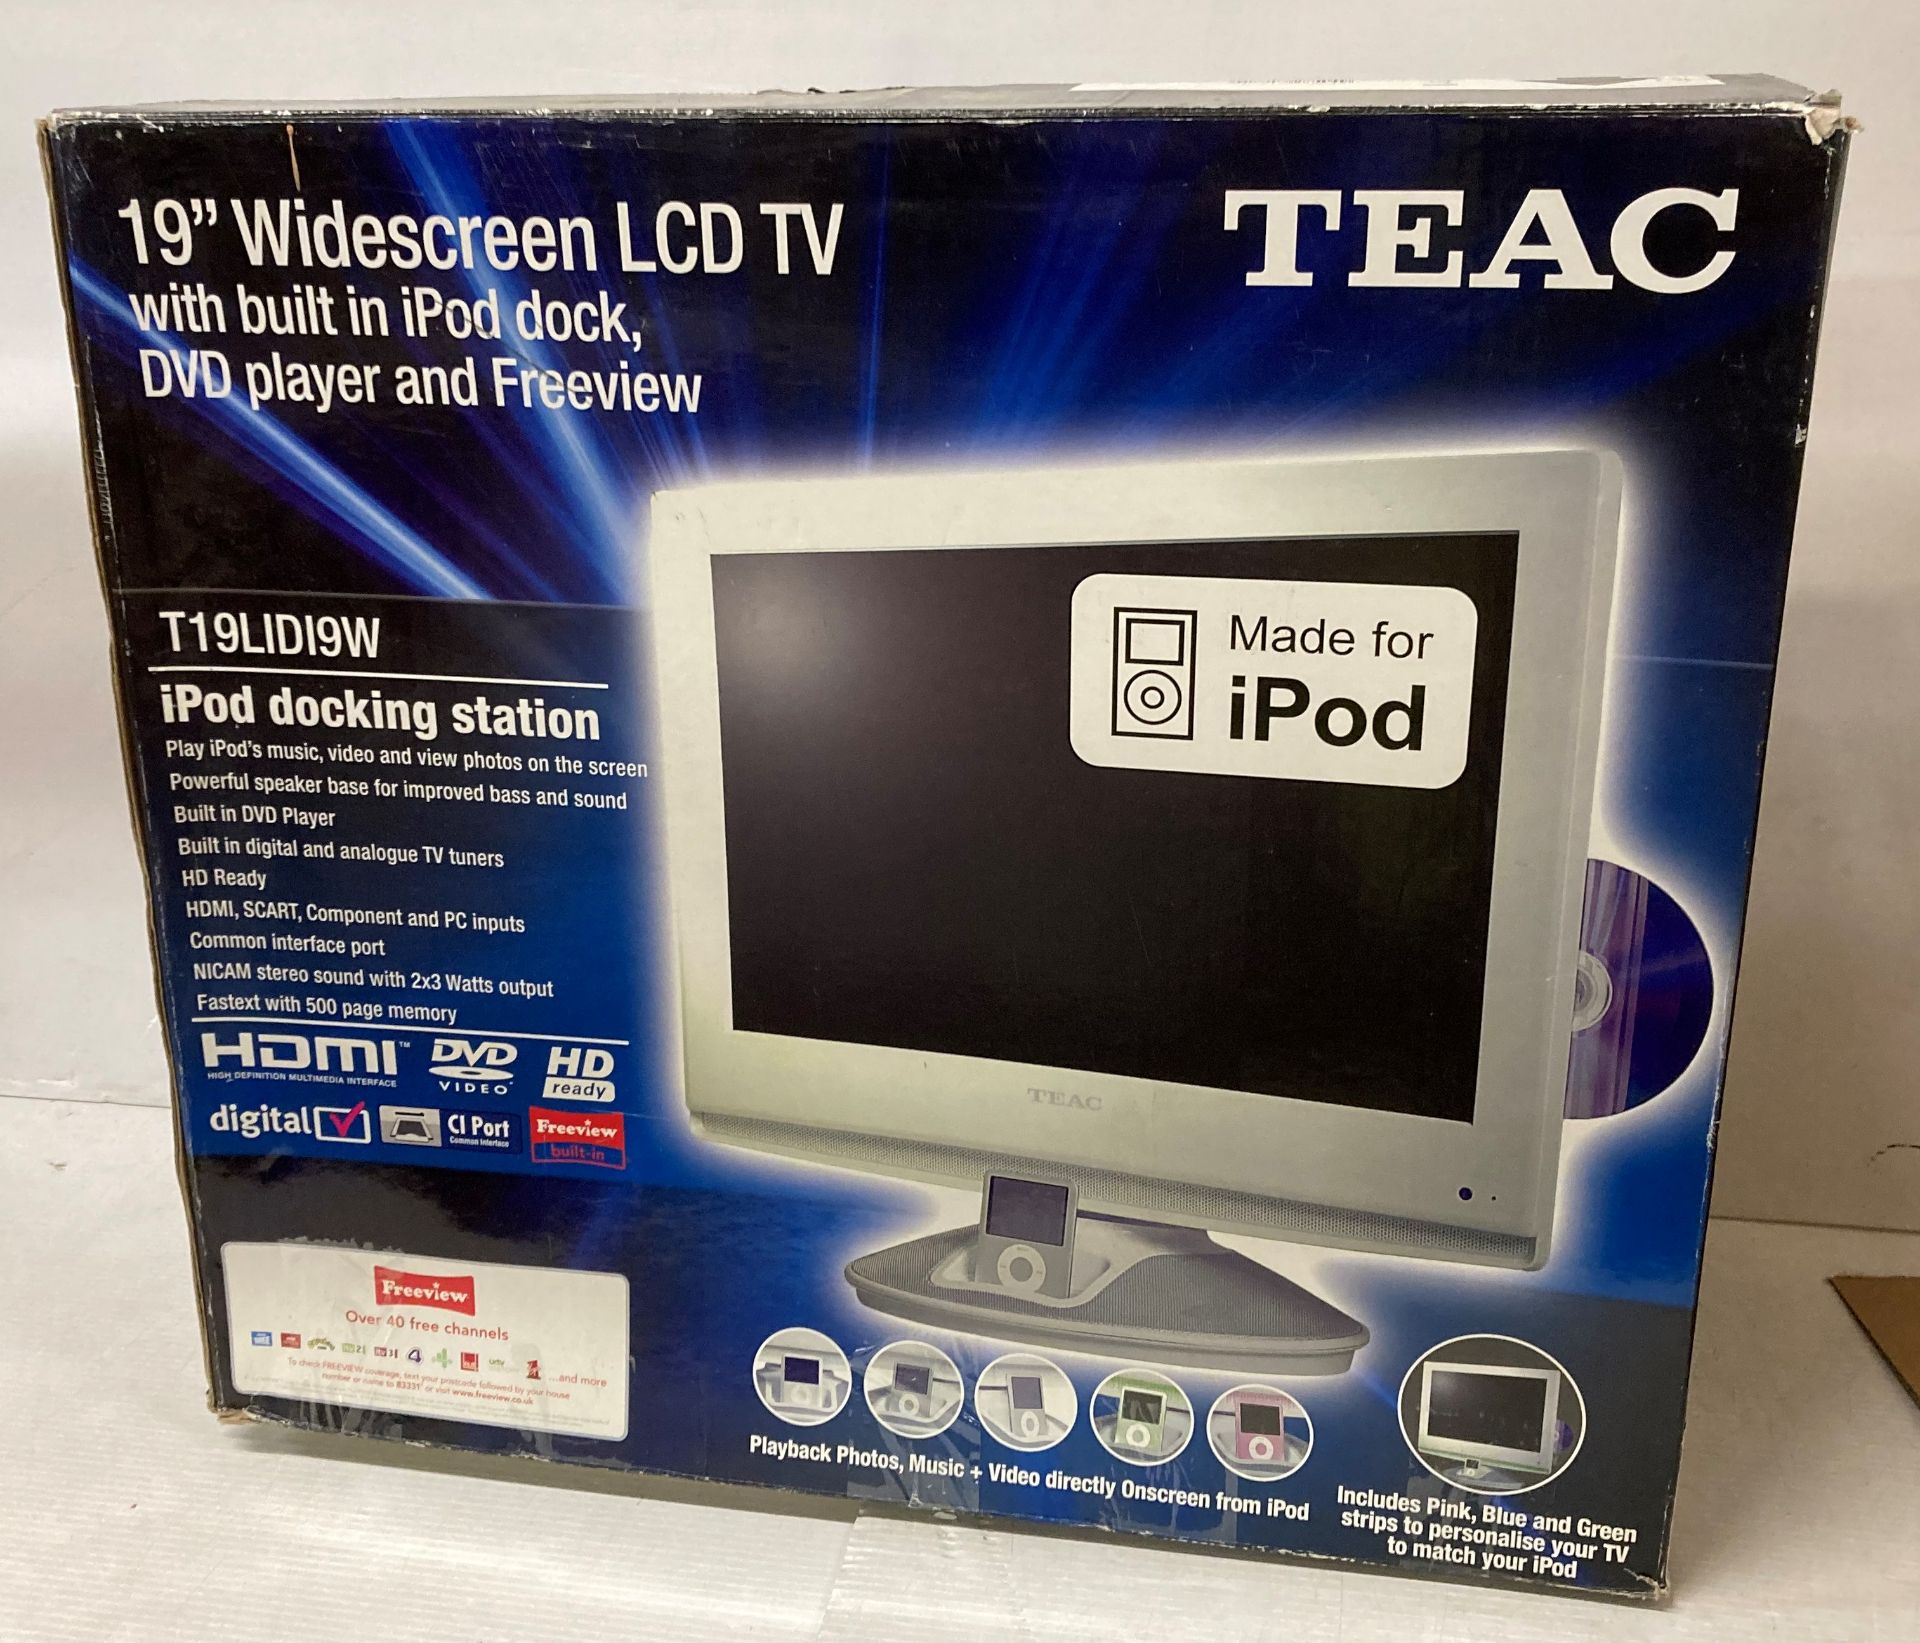 Teac 19" widescreen LCD TV with built-in iPod dock,